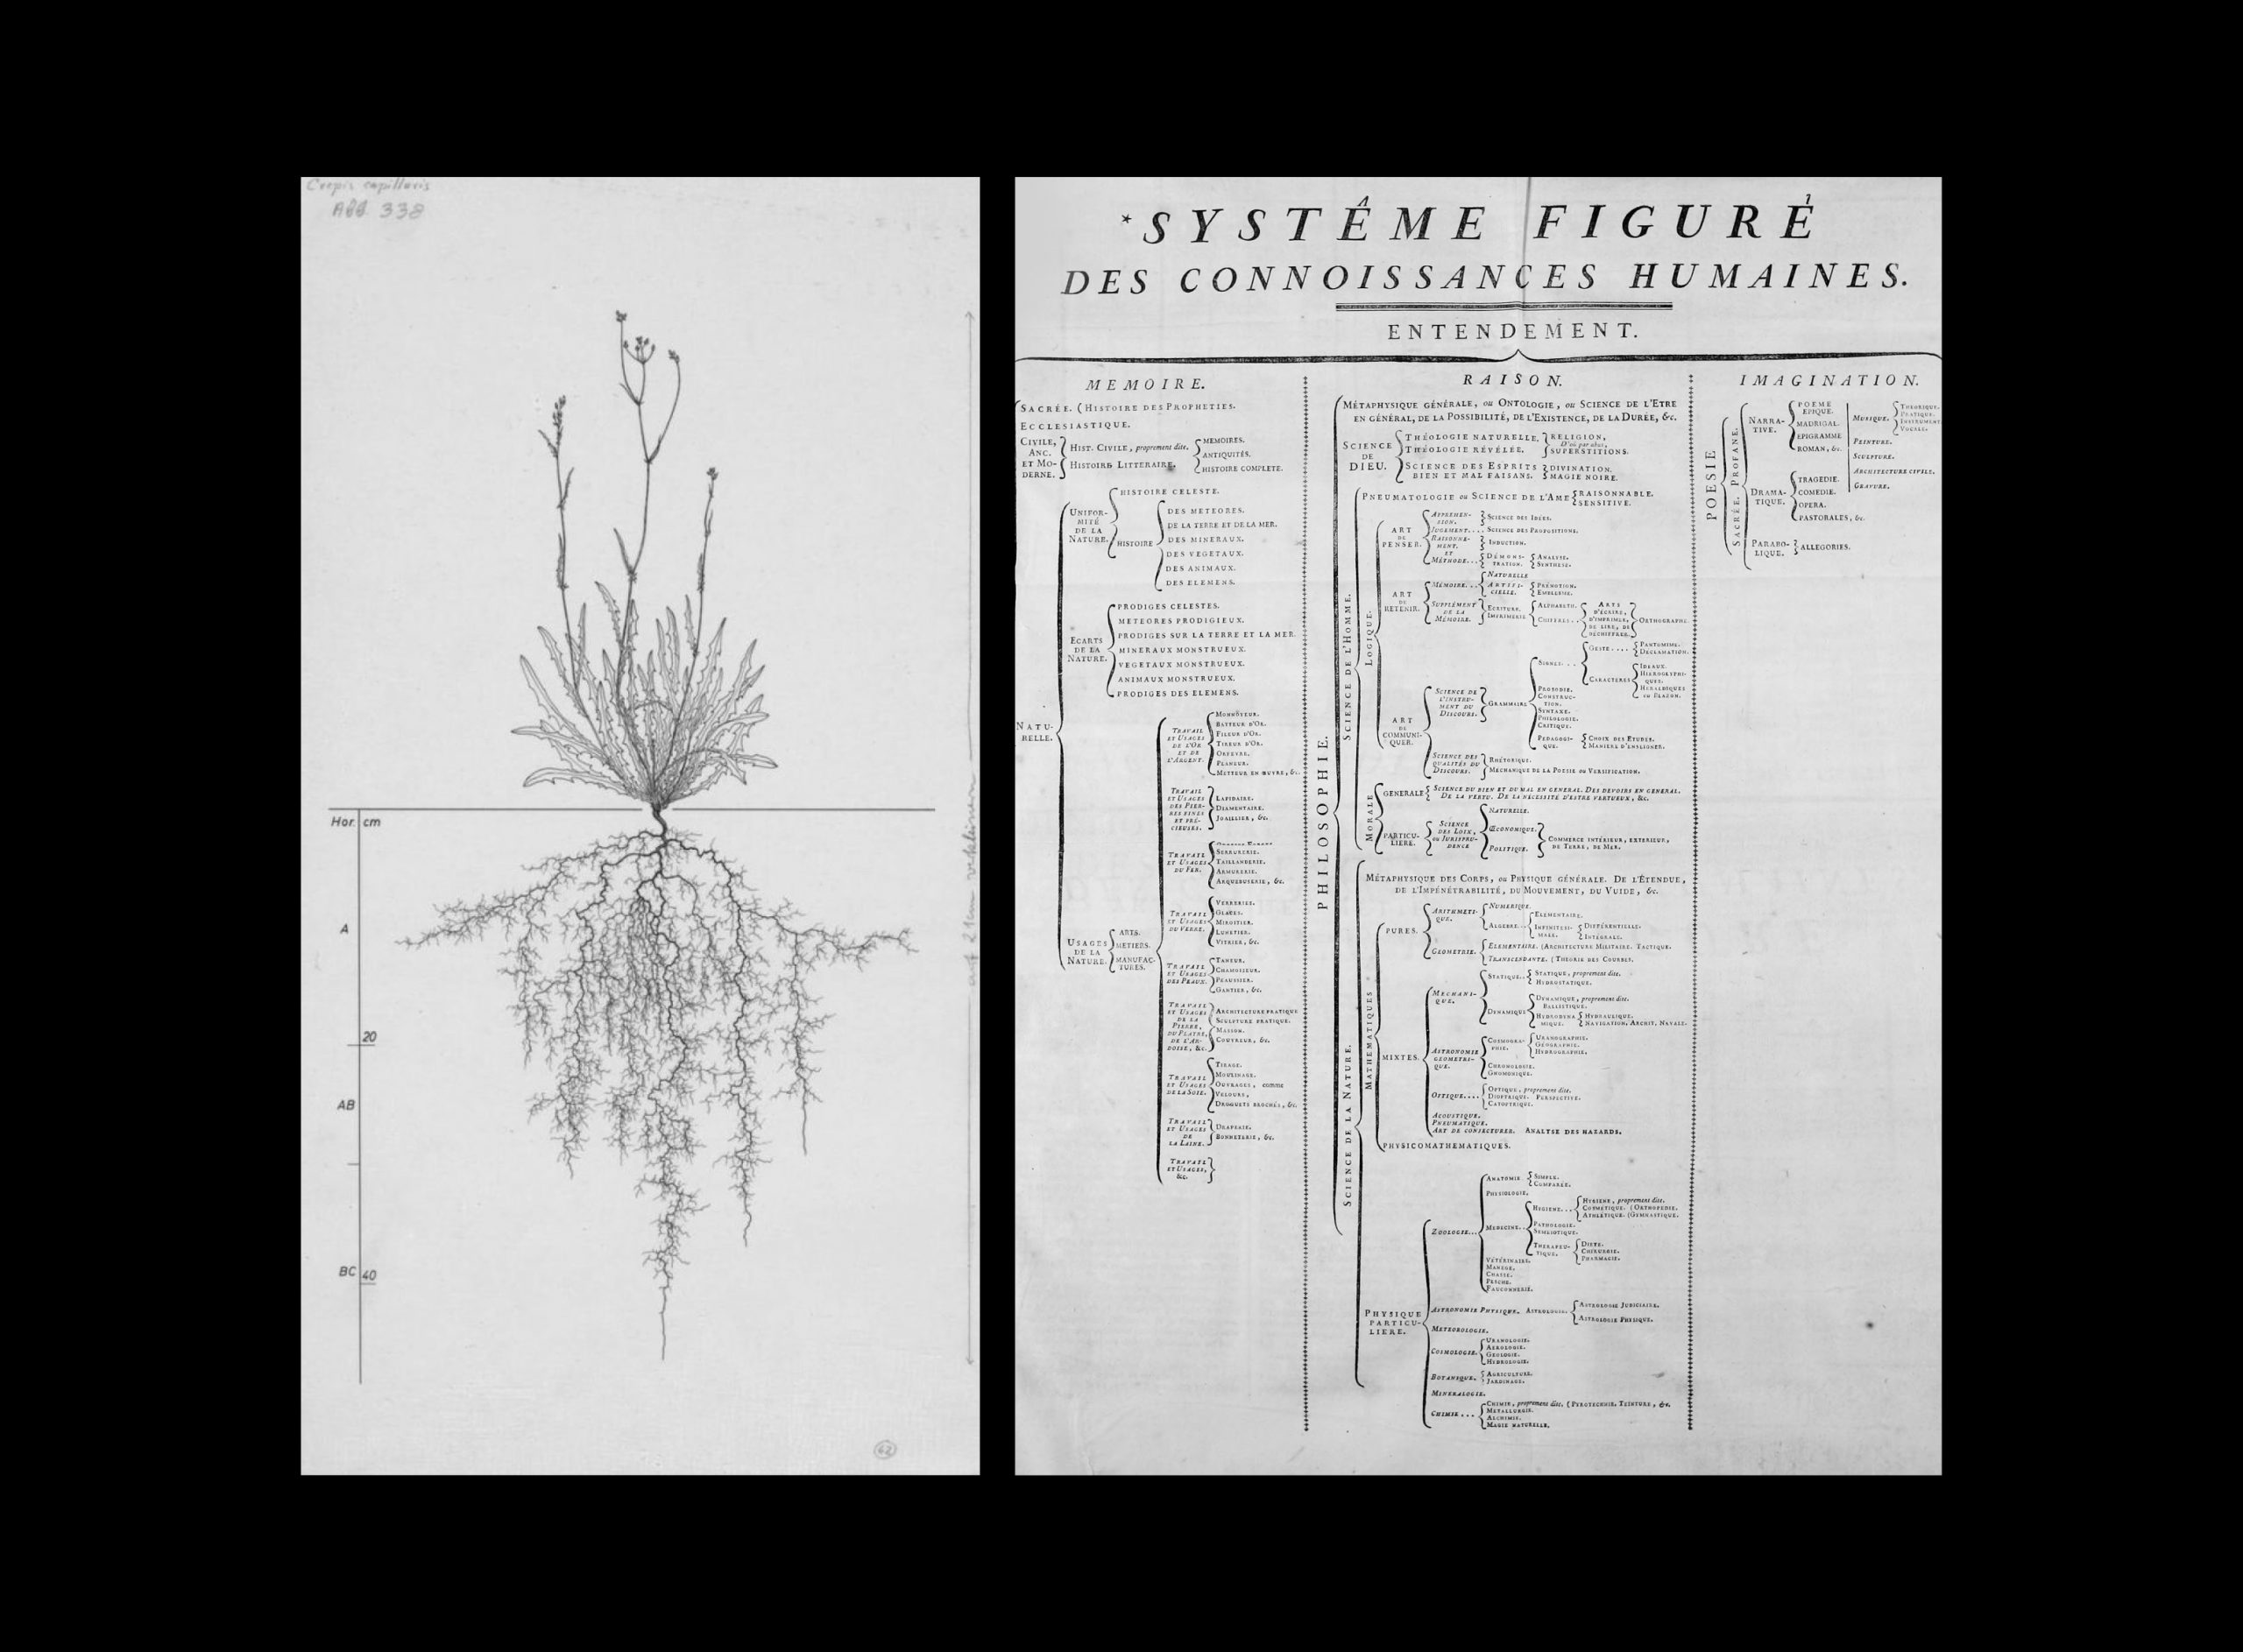 On the left: Erwin Lichtenegger, Crepis capillaris, 1992. On the right: Denis Diderot and Jean le Rond d'Alembert, Classificatory-disciplinary order adopted in the Encyclopédie (1751-1772), a structure that organises man's knowledge in three macro-areas: Memory made of History, Reason dedicated to Philosophy and Imagination capable of creating poetry.